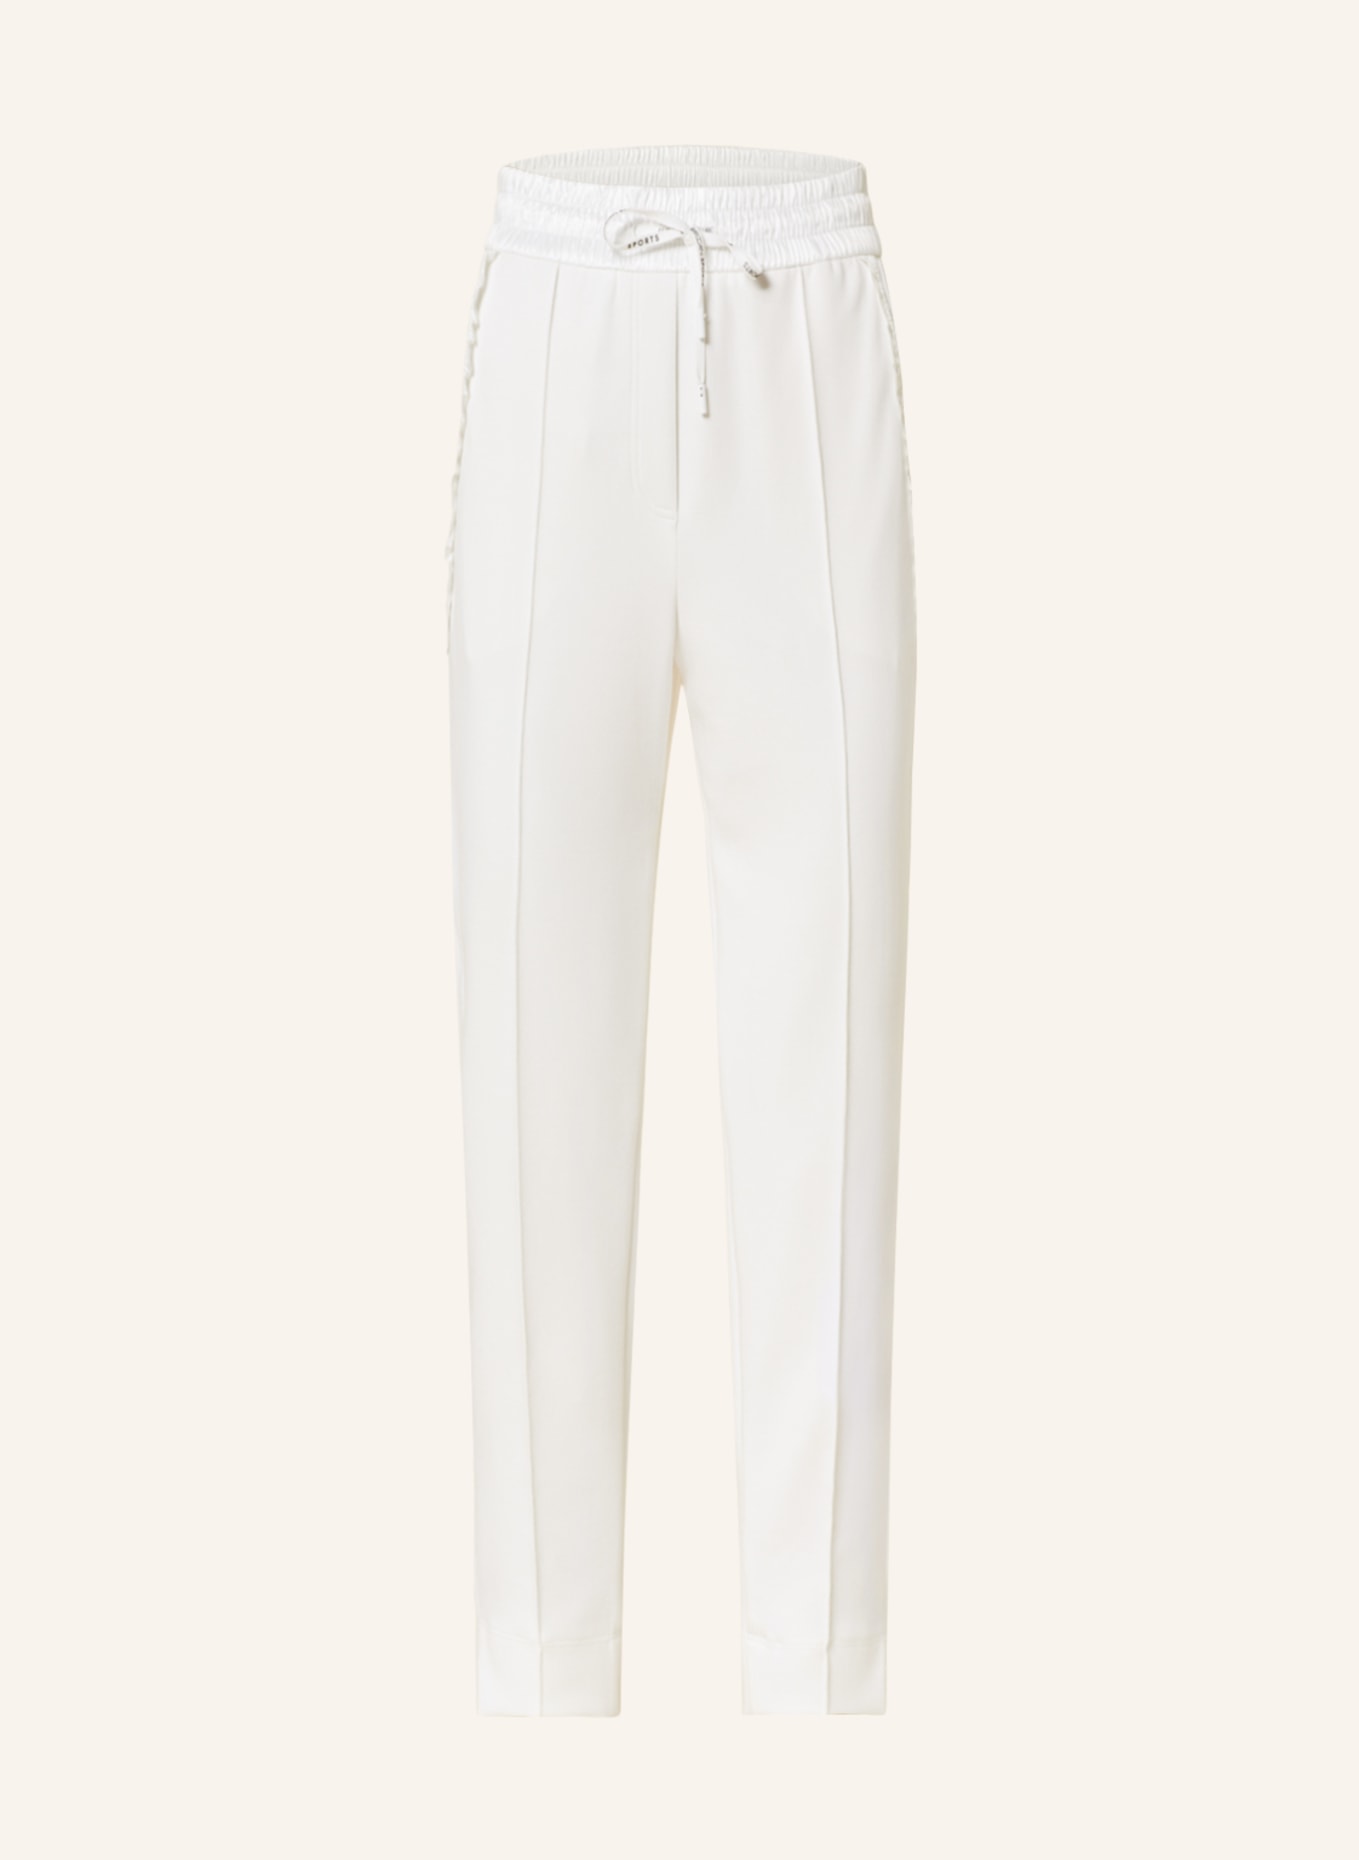 MARC CAIN Pants in jogger style, Color: 110 off (Image 1)